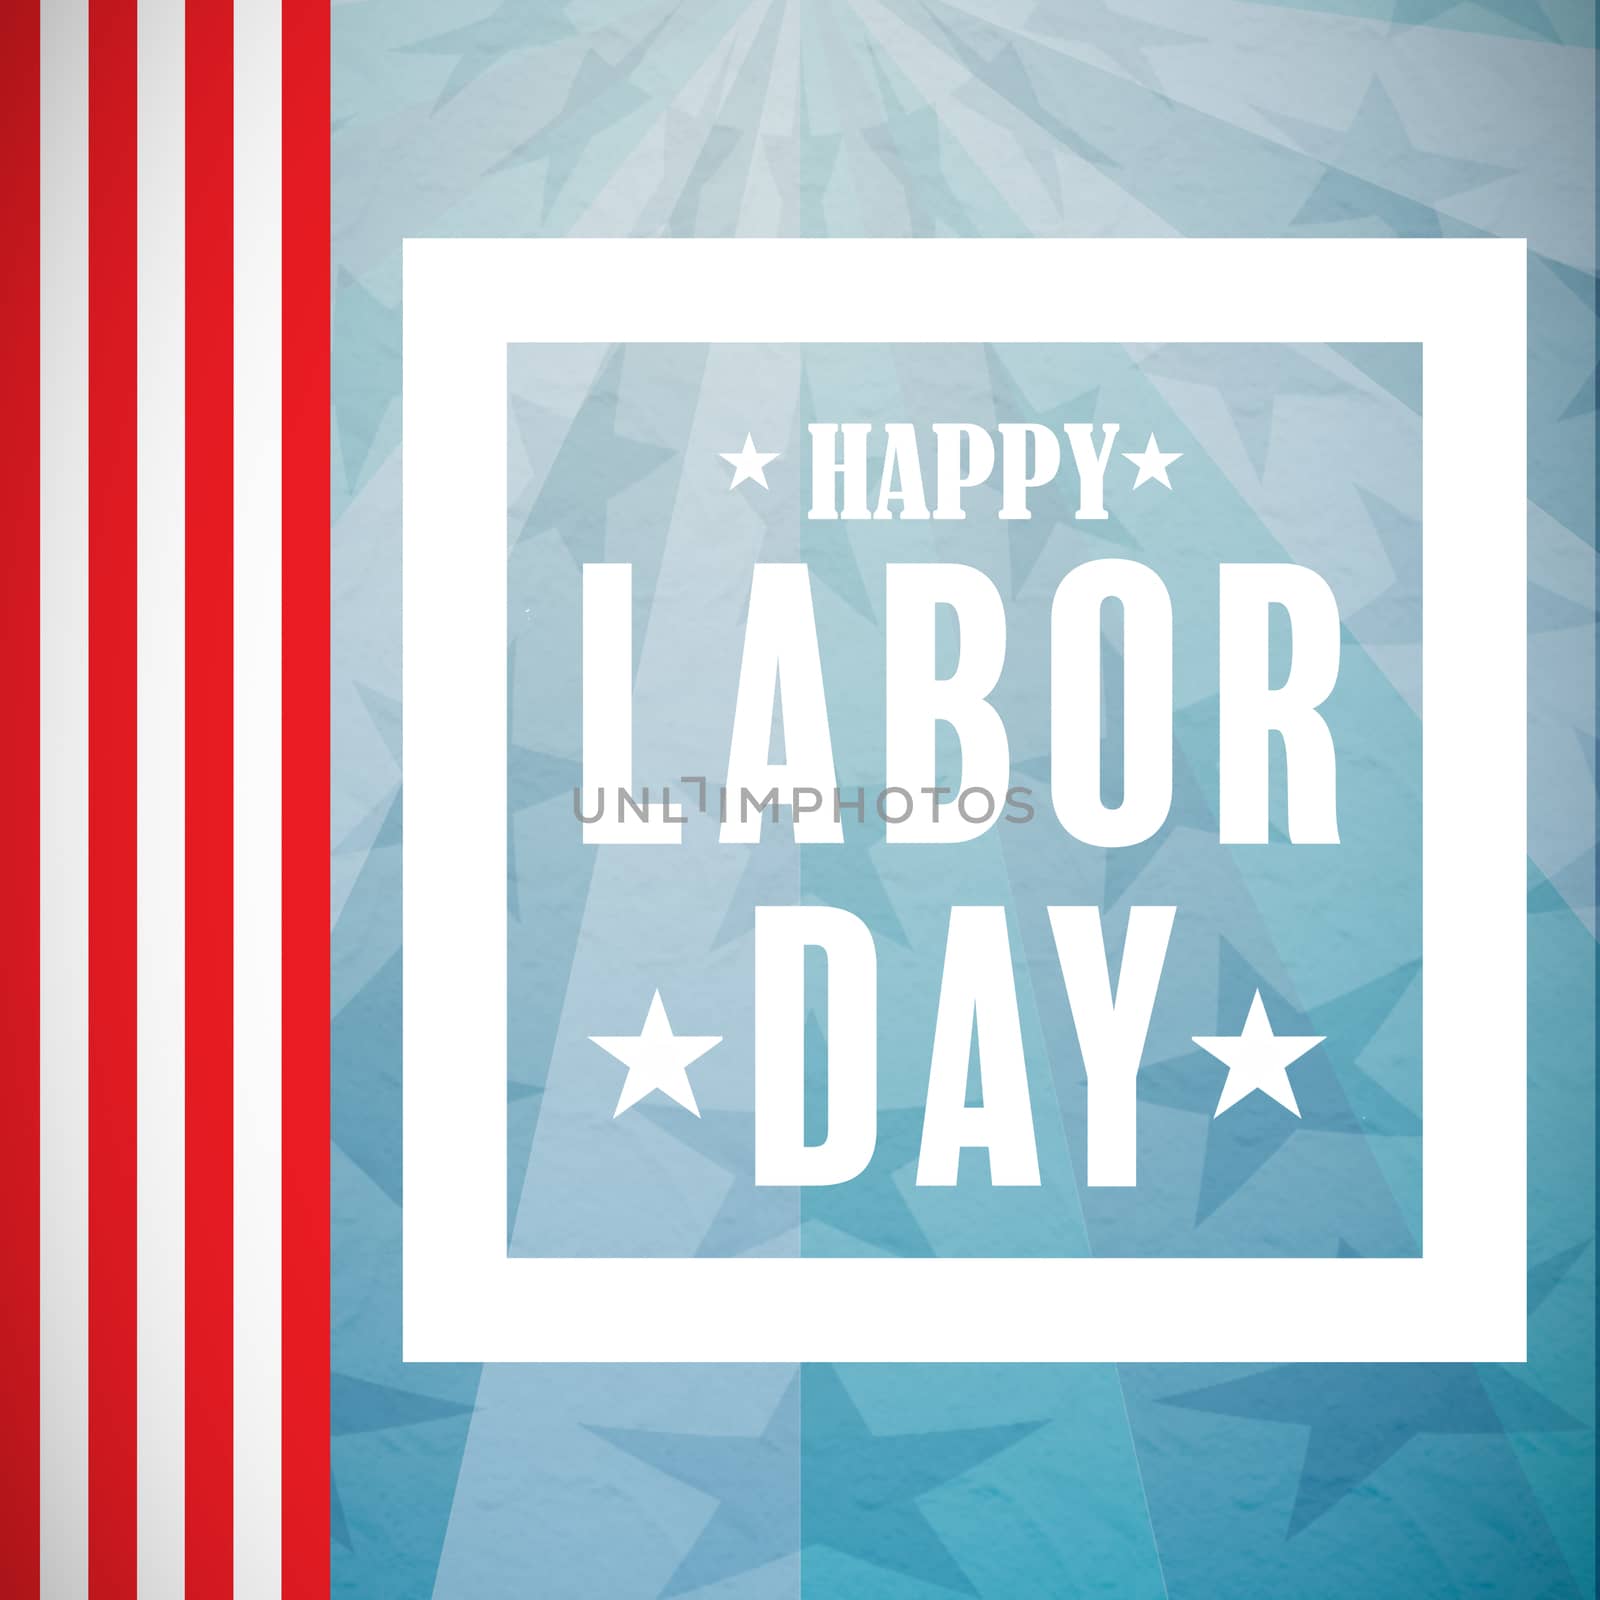 Composite image of happy labor day poster against digitally generated background